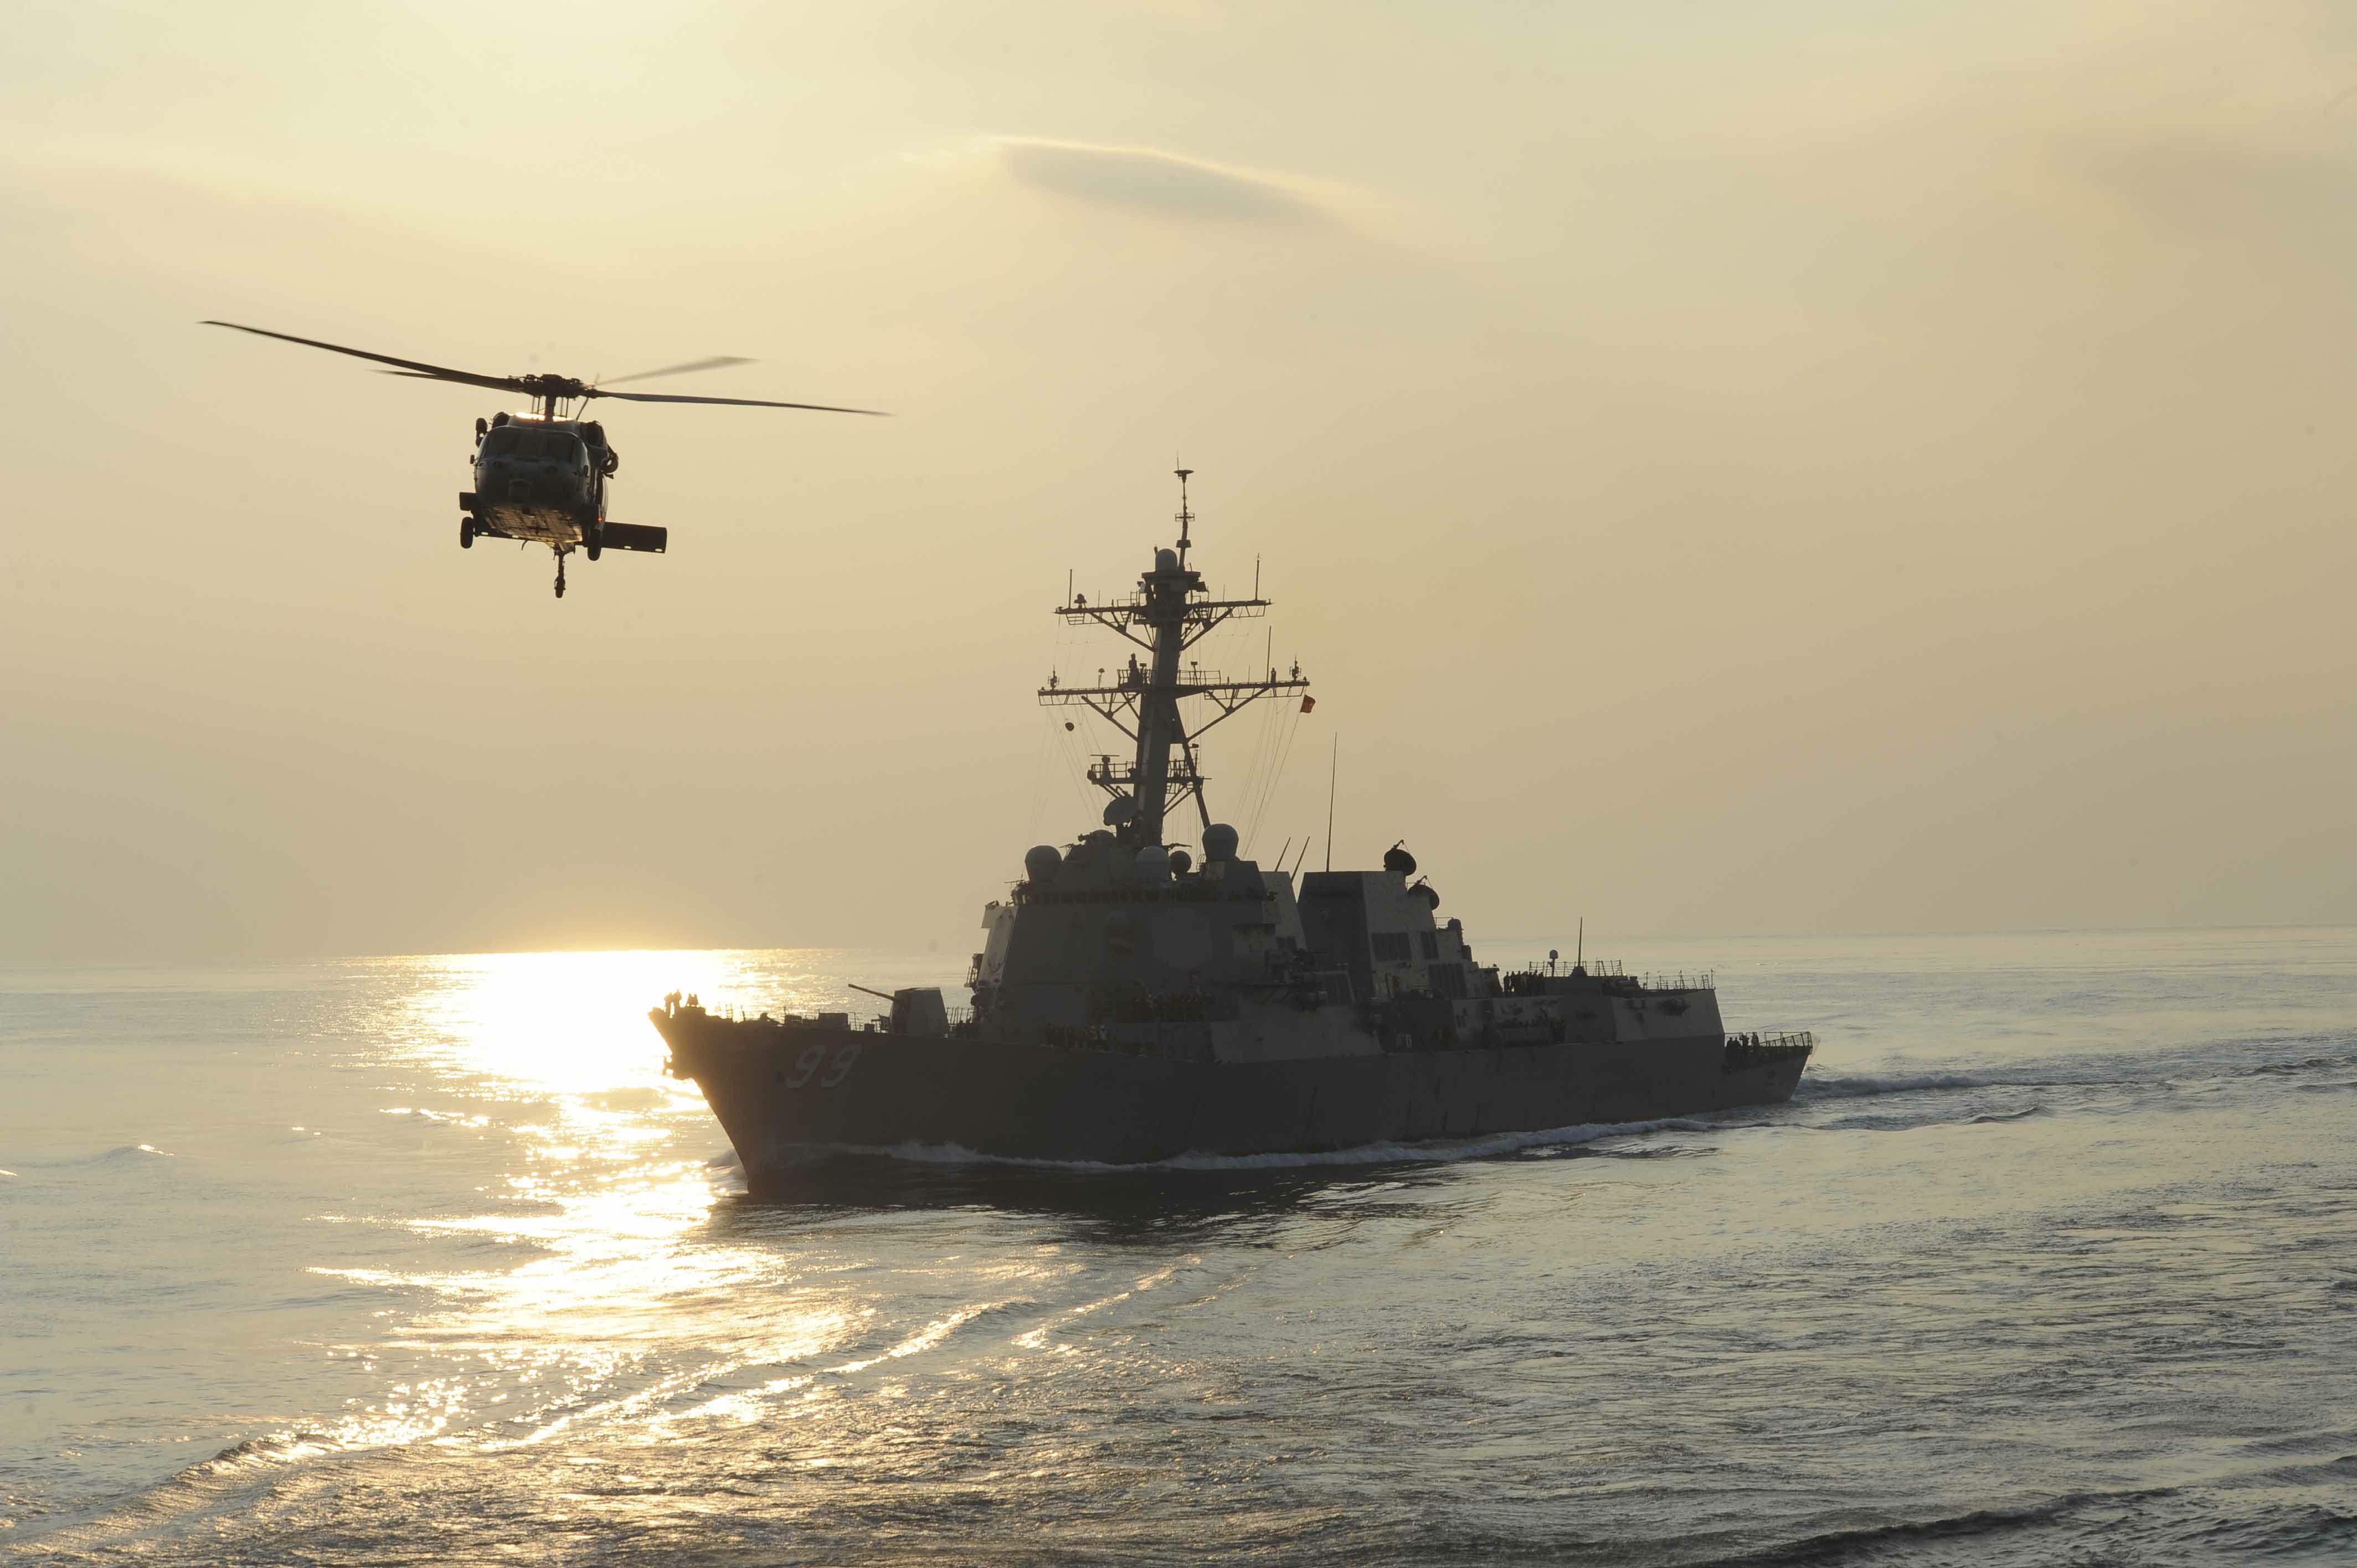 An_MH-60S_Knighthawk_flies_by_the_guided-missile_destroyer_USS_Farragut_%28DDG_99%29_during_a_replenishment-at-sea_evolution_in_the_Arabian_Sea_on_Dec_121204-N-OY799-038.jpg